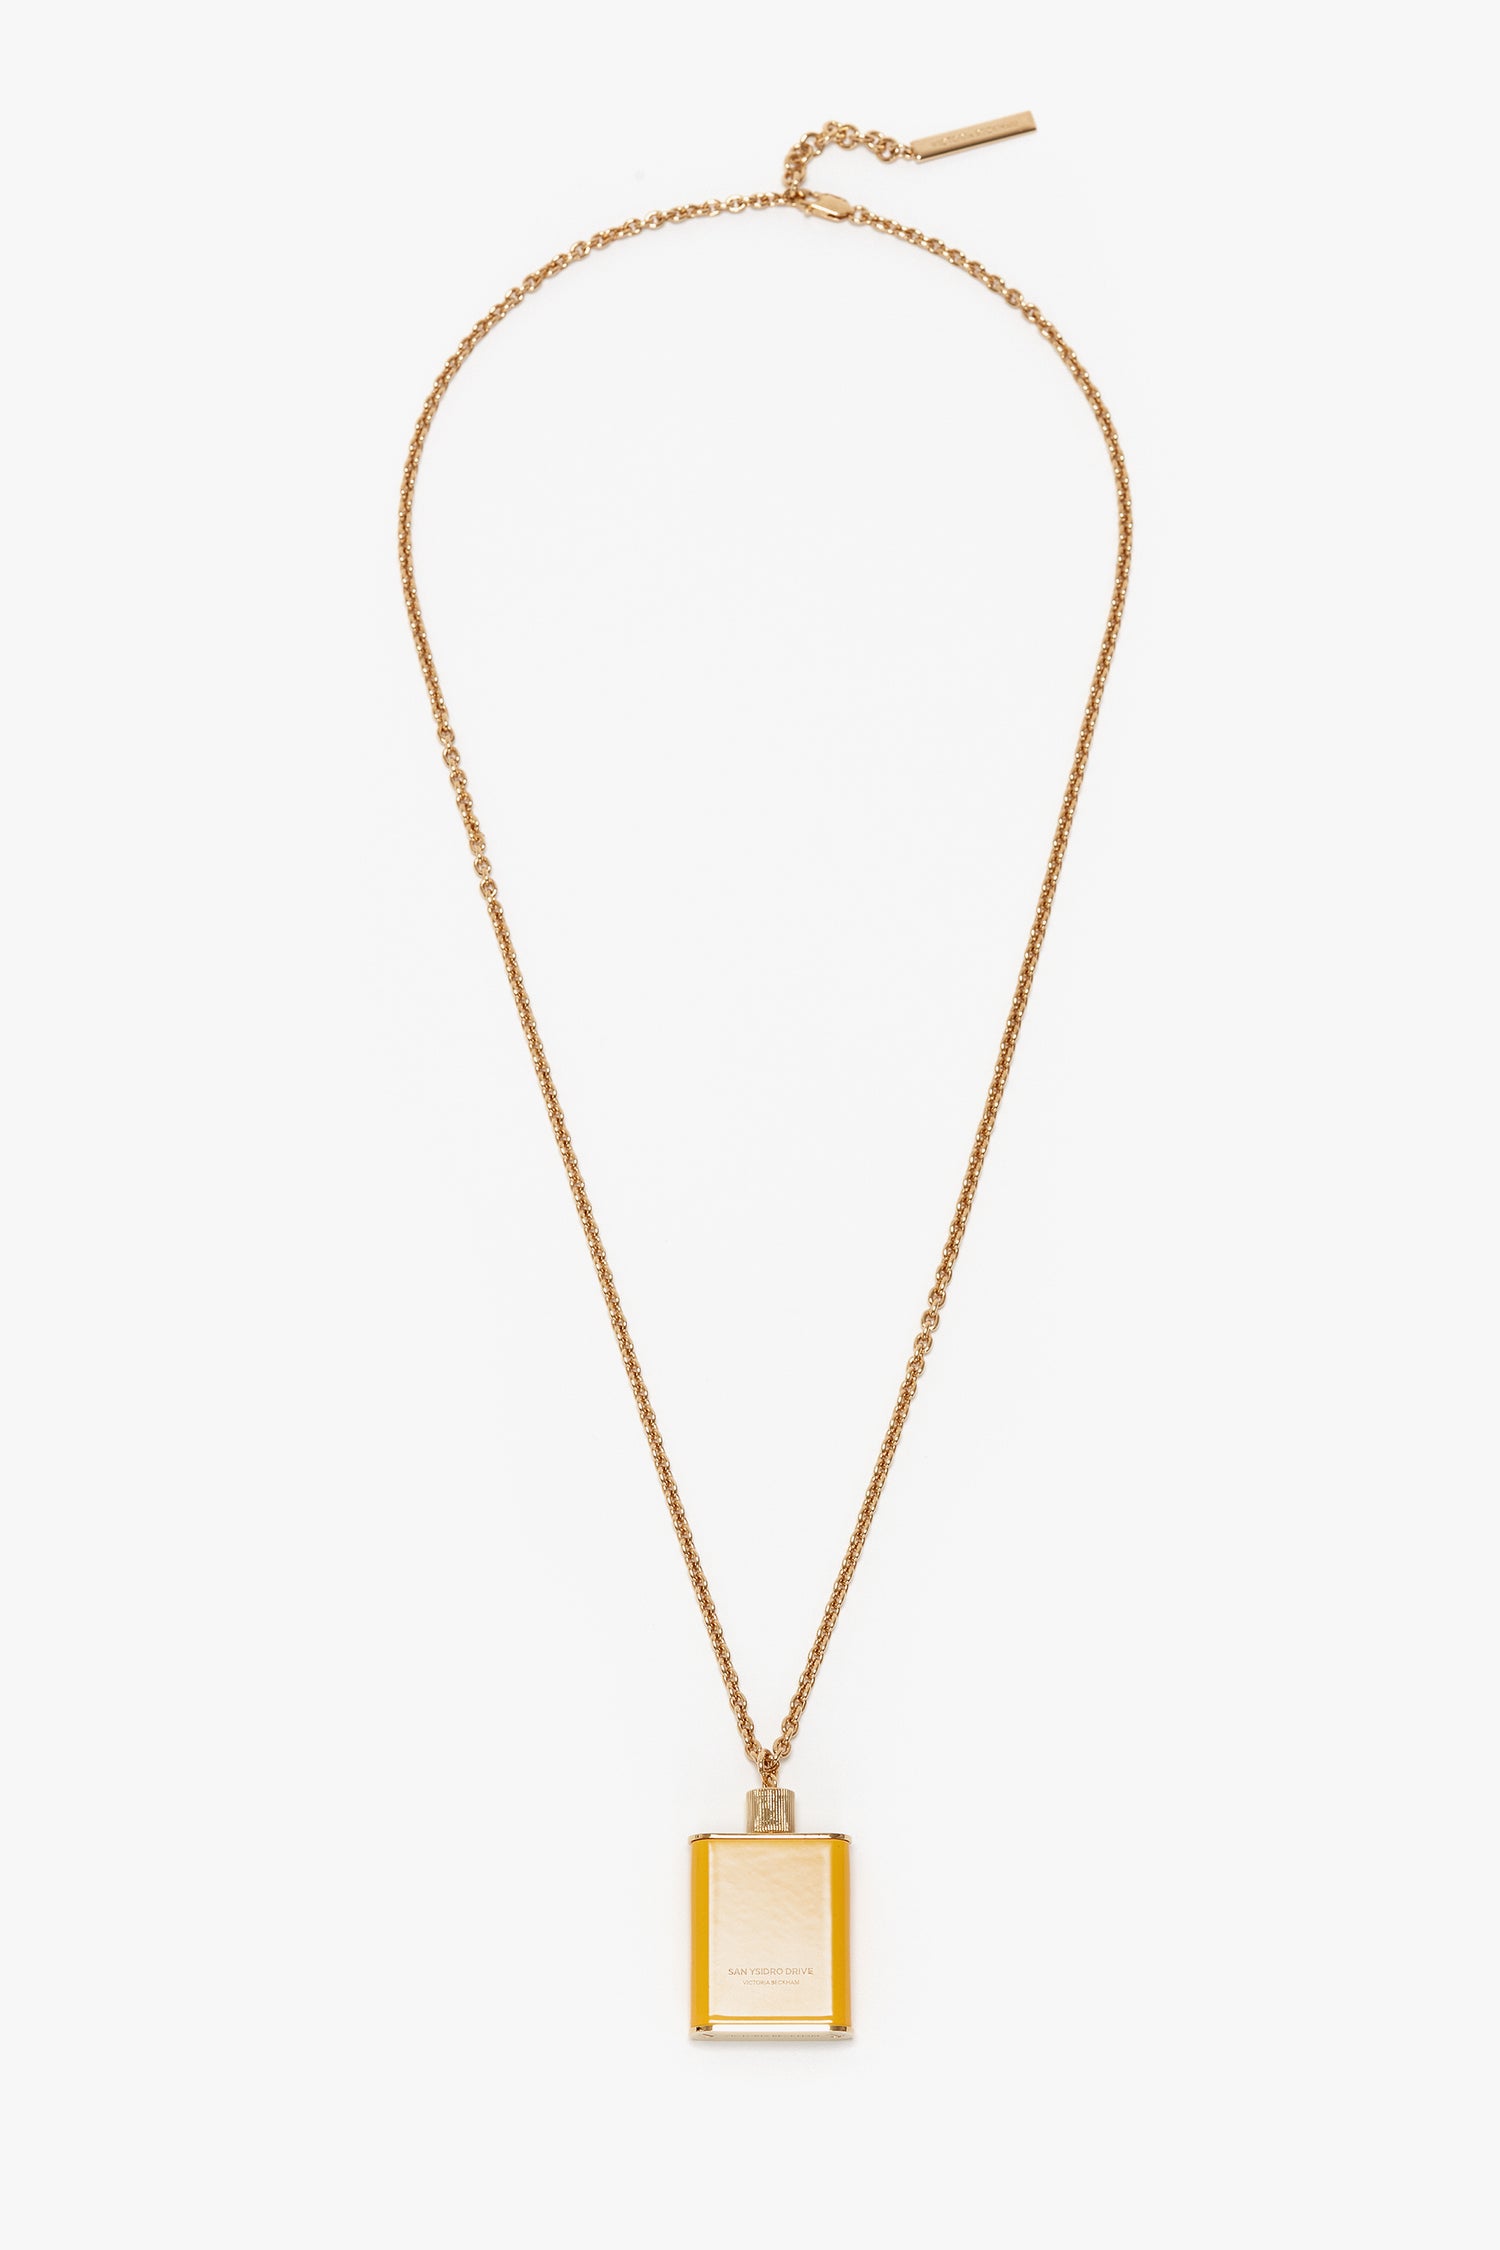 A gold-plated pendant necklace featuring a rectangular charm with a small top ring, hanging from a fine chain with an adjustable clasp. The charm is crafted in gold brushed brass, adding an extra touch of elegance to this exquisite piece: the Perfume Bottle Necklace In San Ysidro Drive by Victoria Beckham.